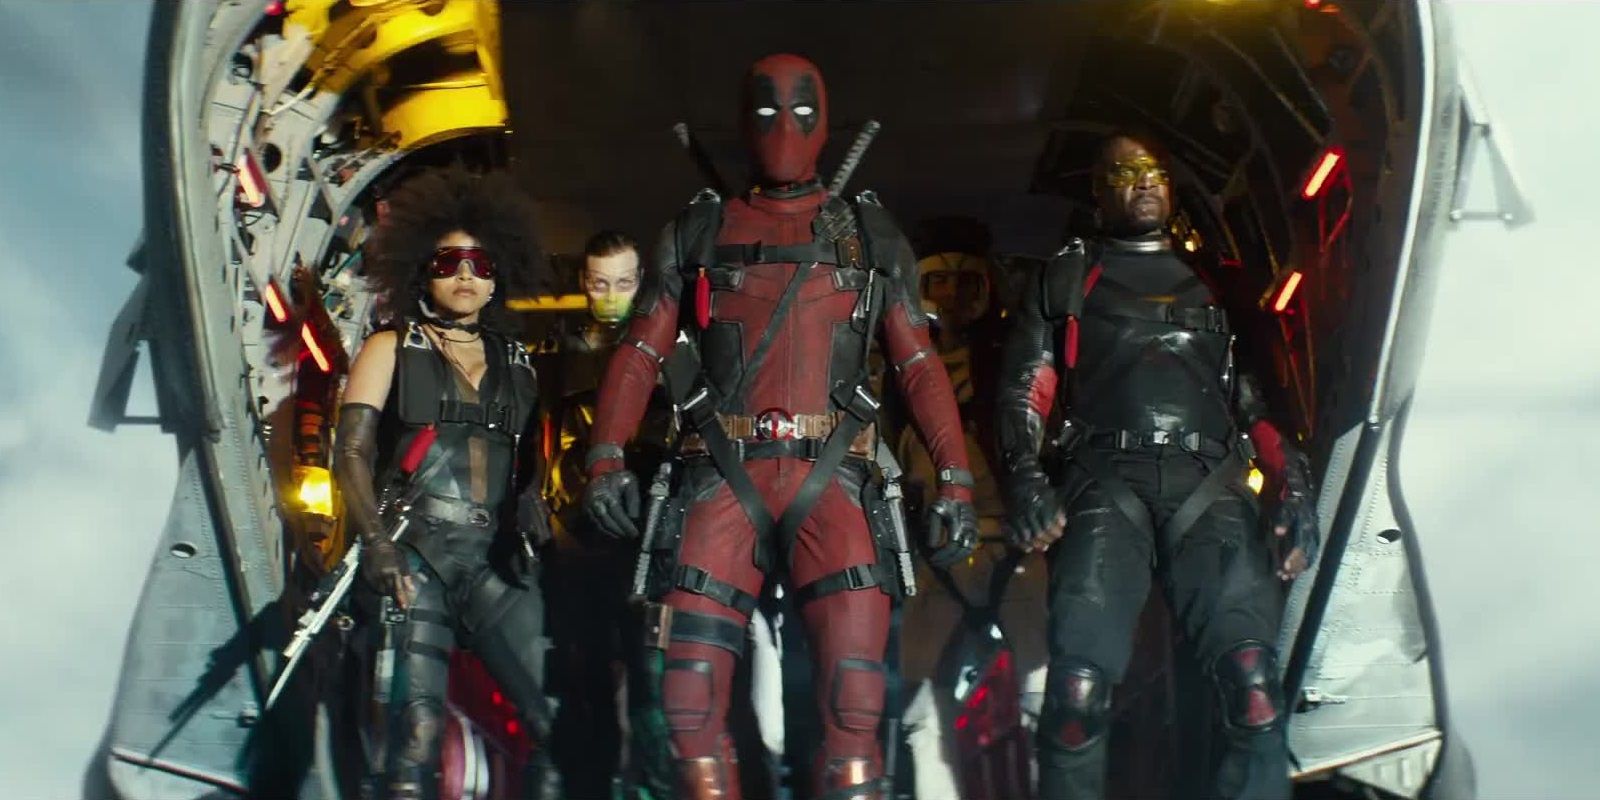 Deadpool and the X-Force jump out of the plane in Deadpool 2